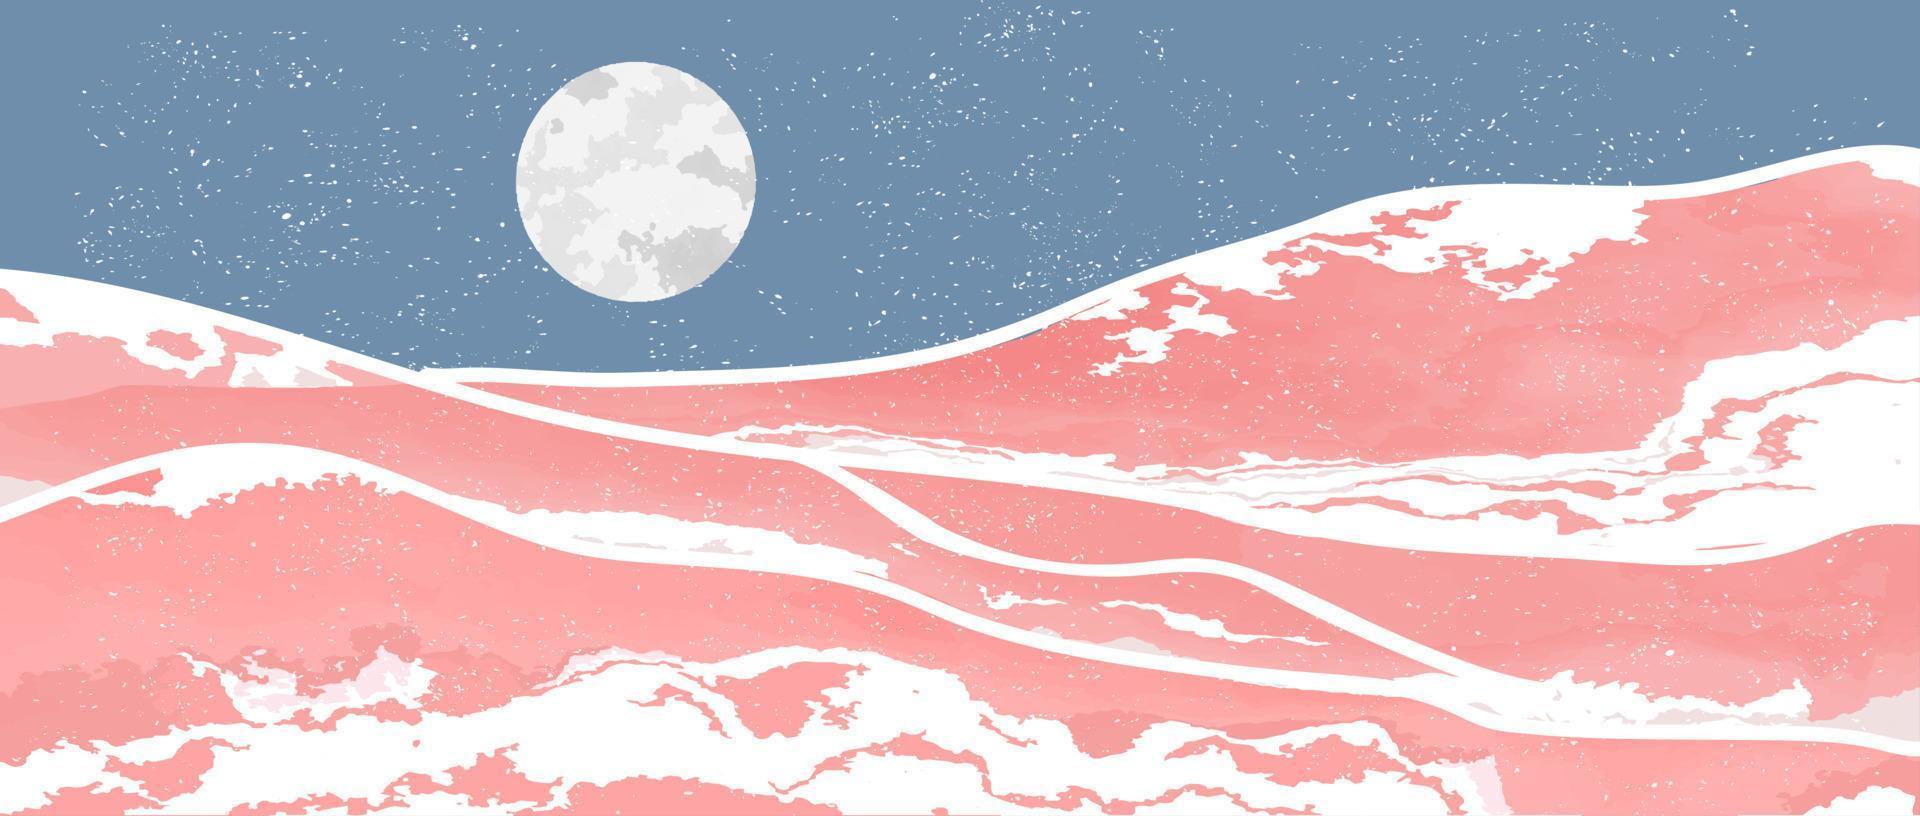 A pink and white landscape with mountains - Abstract